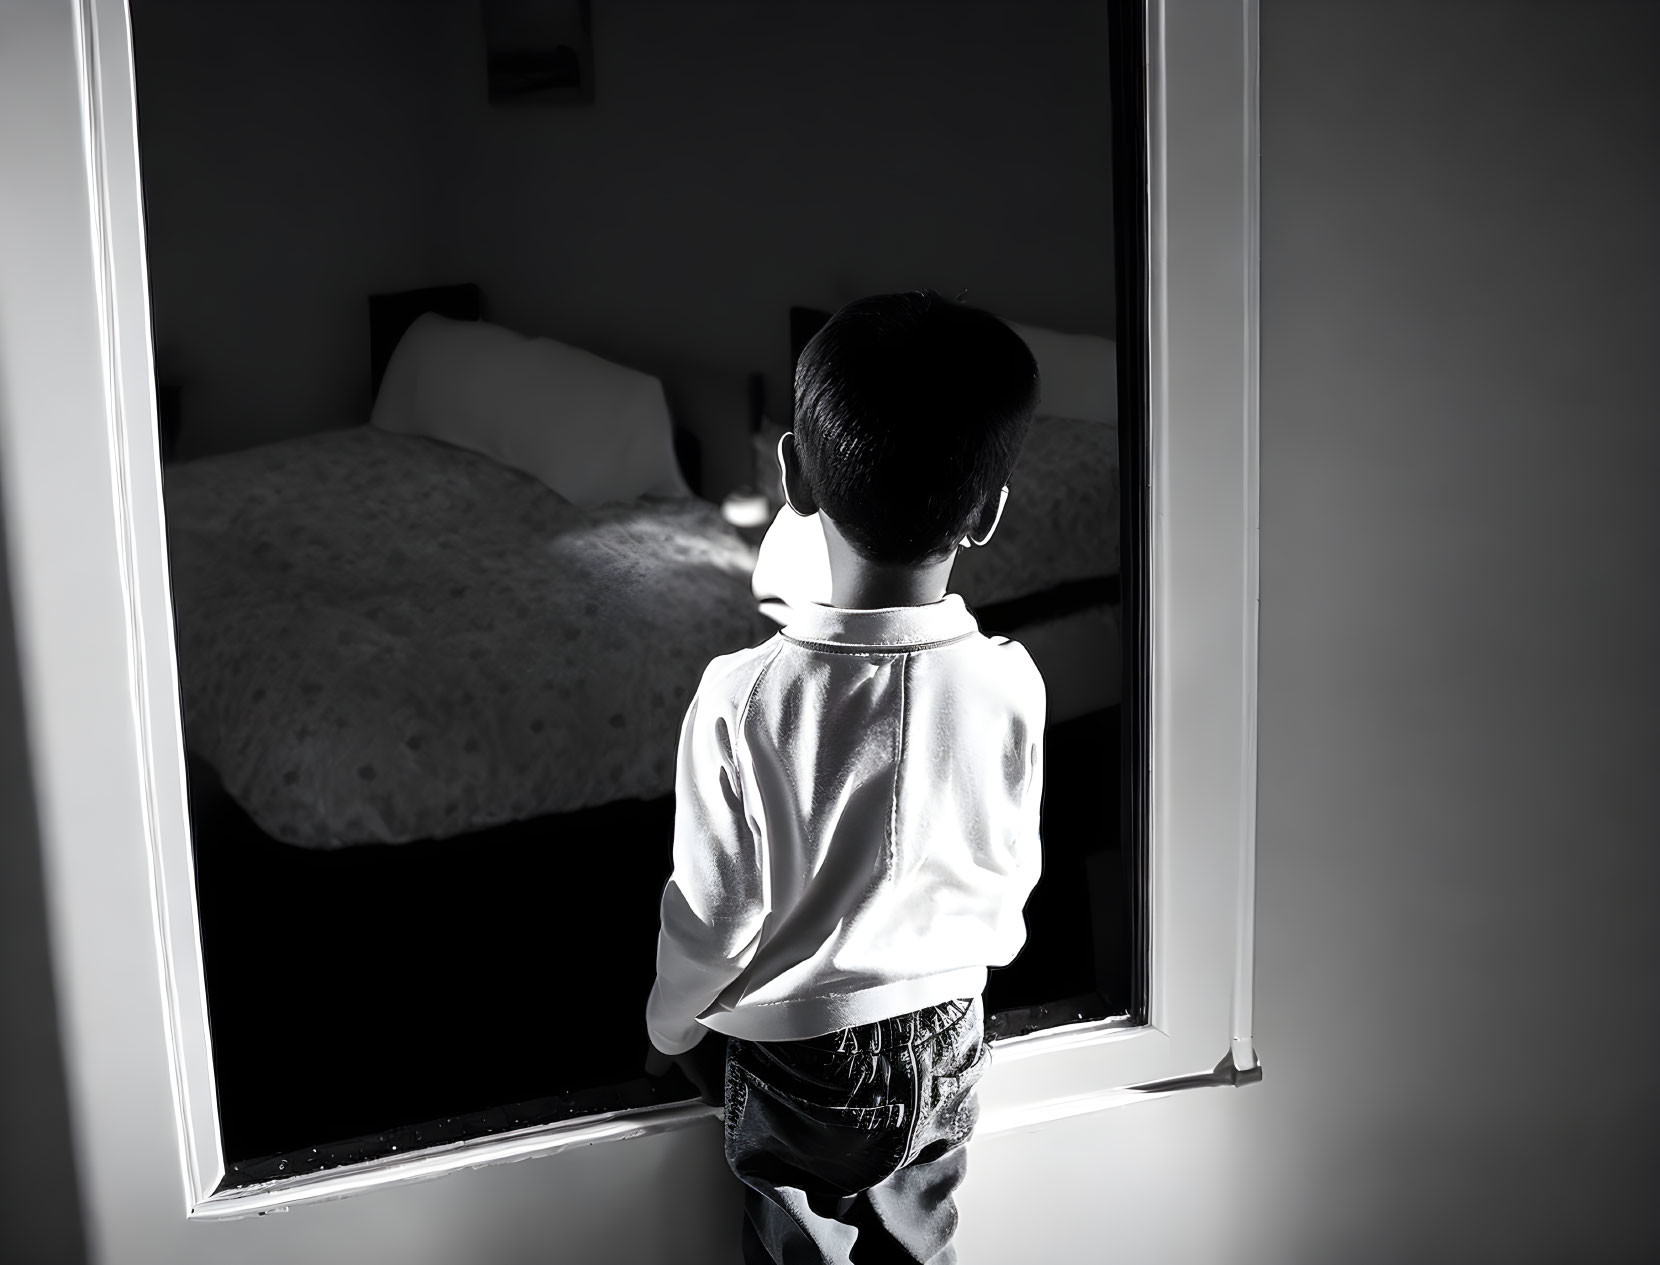 Child looking out of window into dark room with sunlight silhouette